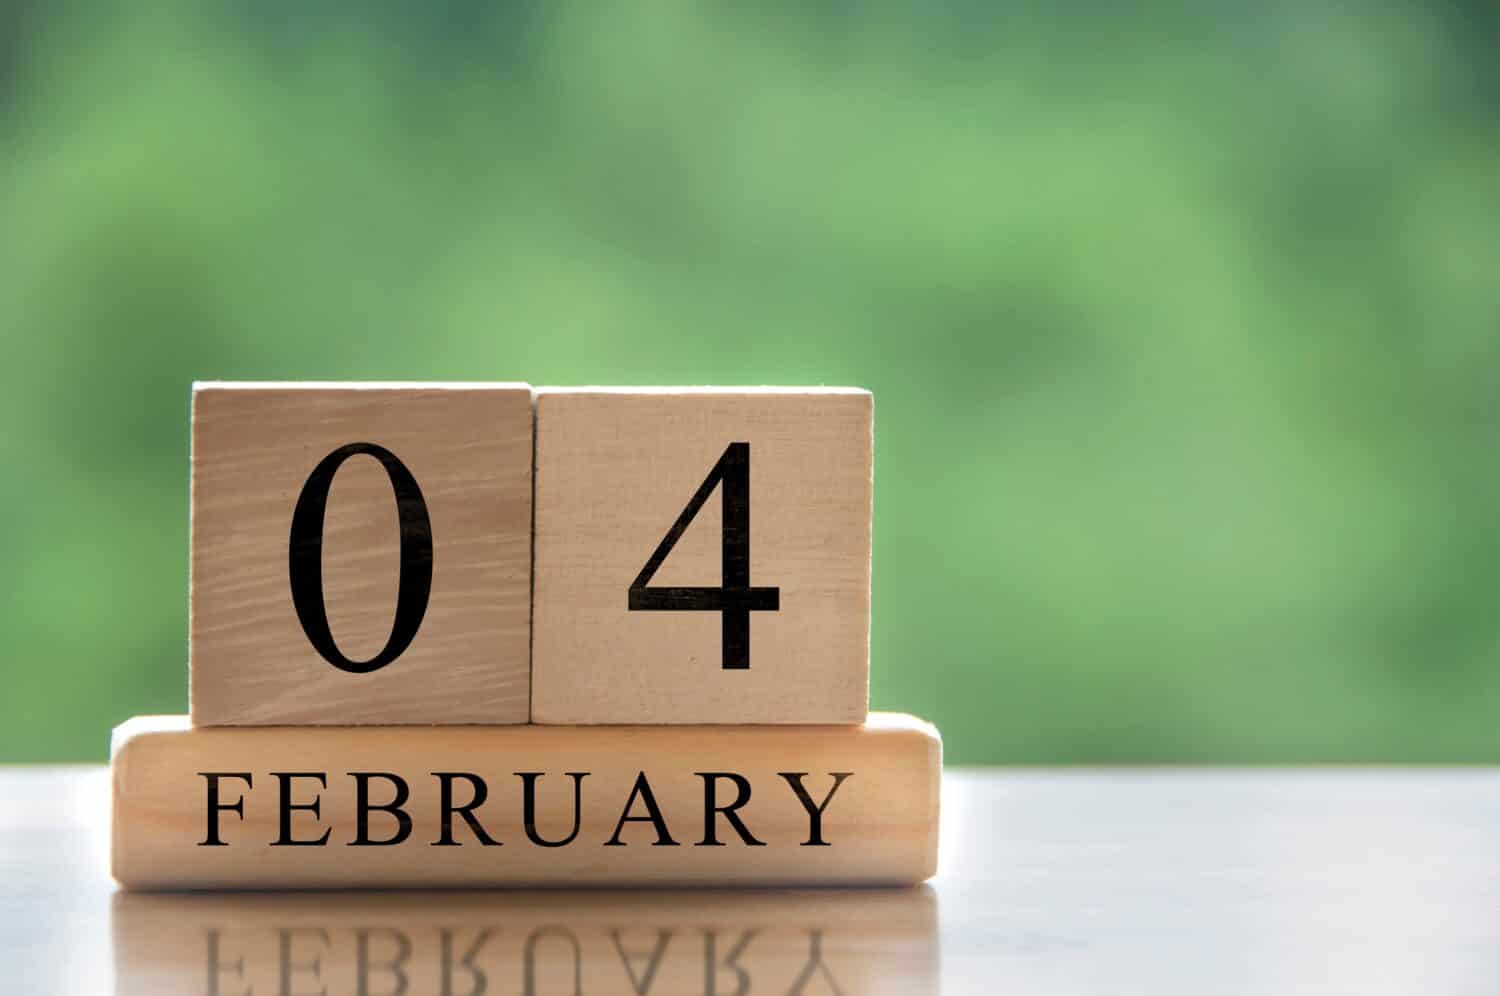 February Trivia Questions And Answers February 4